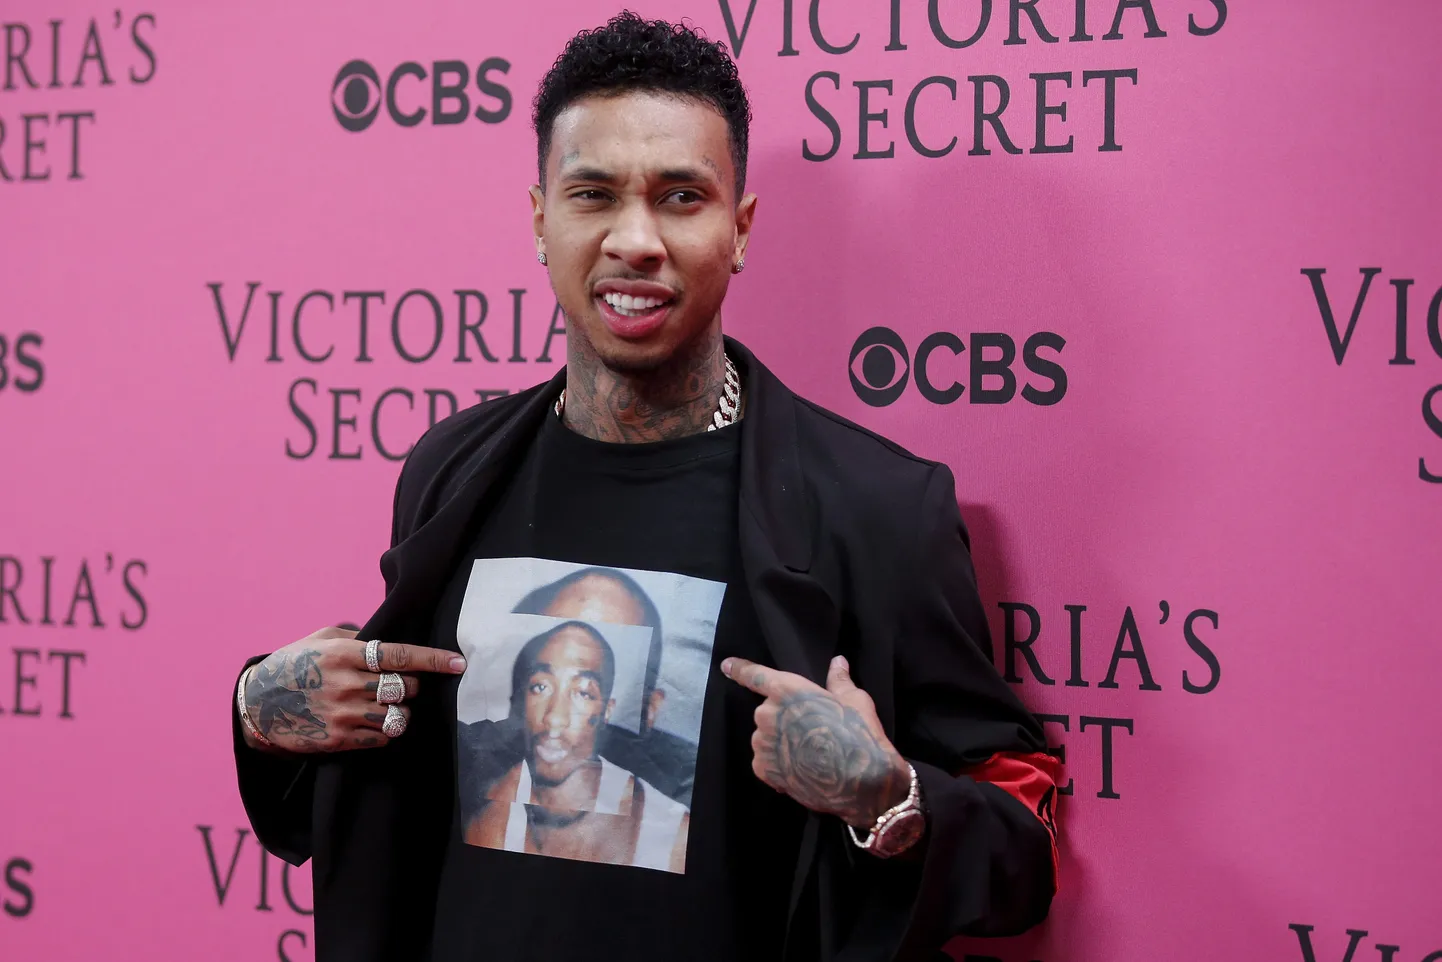 Rapper Tyga points to an image of Tupac Shakur on his shirt as he arrives before the Victoria's Secret Fashion Show in the Manhattan borough of New York, November 10, 2015.    REUTERS/Carlo Allegri FOR EDITORIAL USE ONLY. NOT FOR SALE FOR MARKETING OR ADVERTISING CAMPAIGNS.